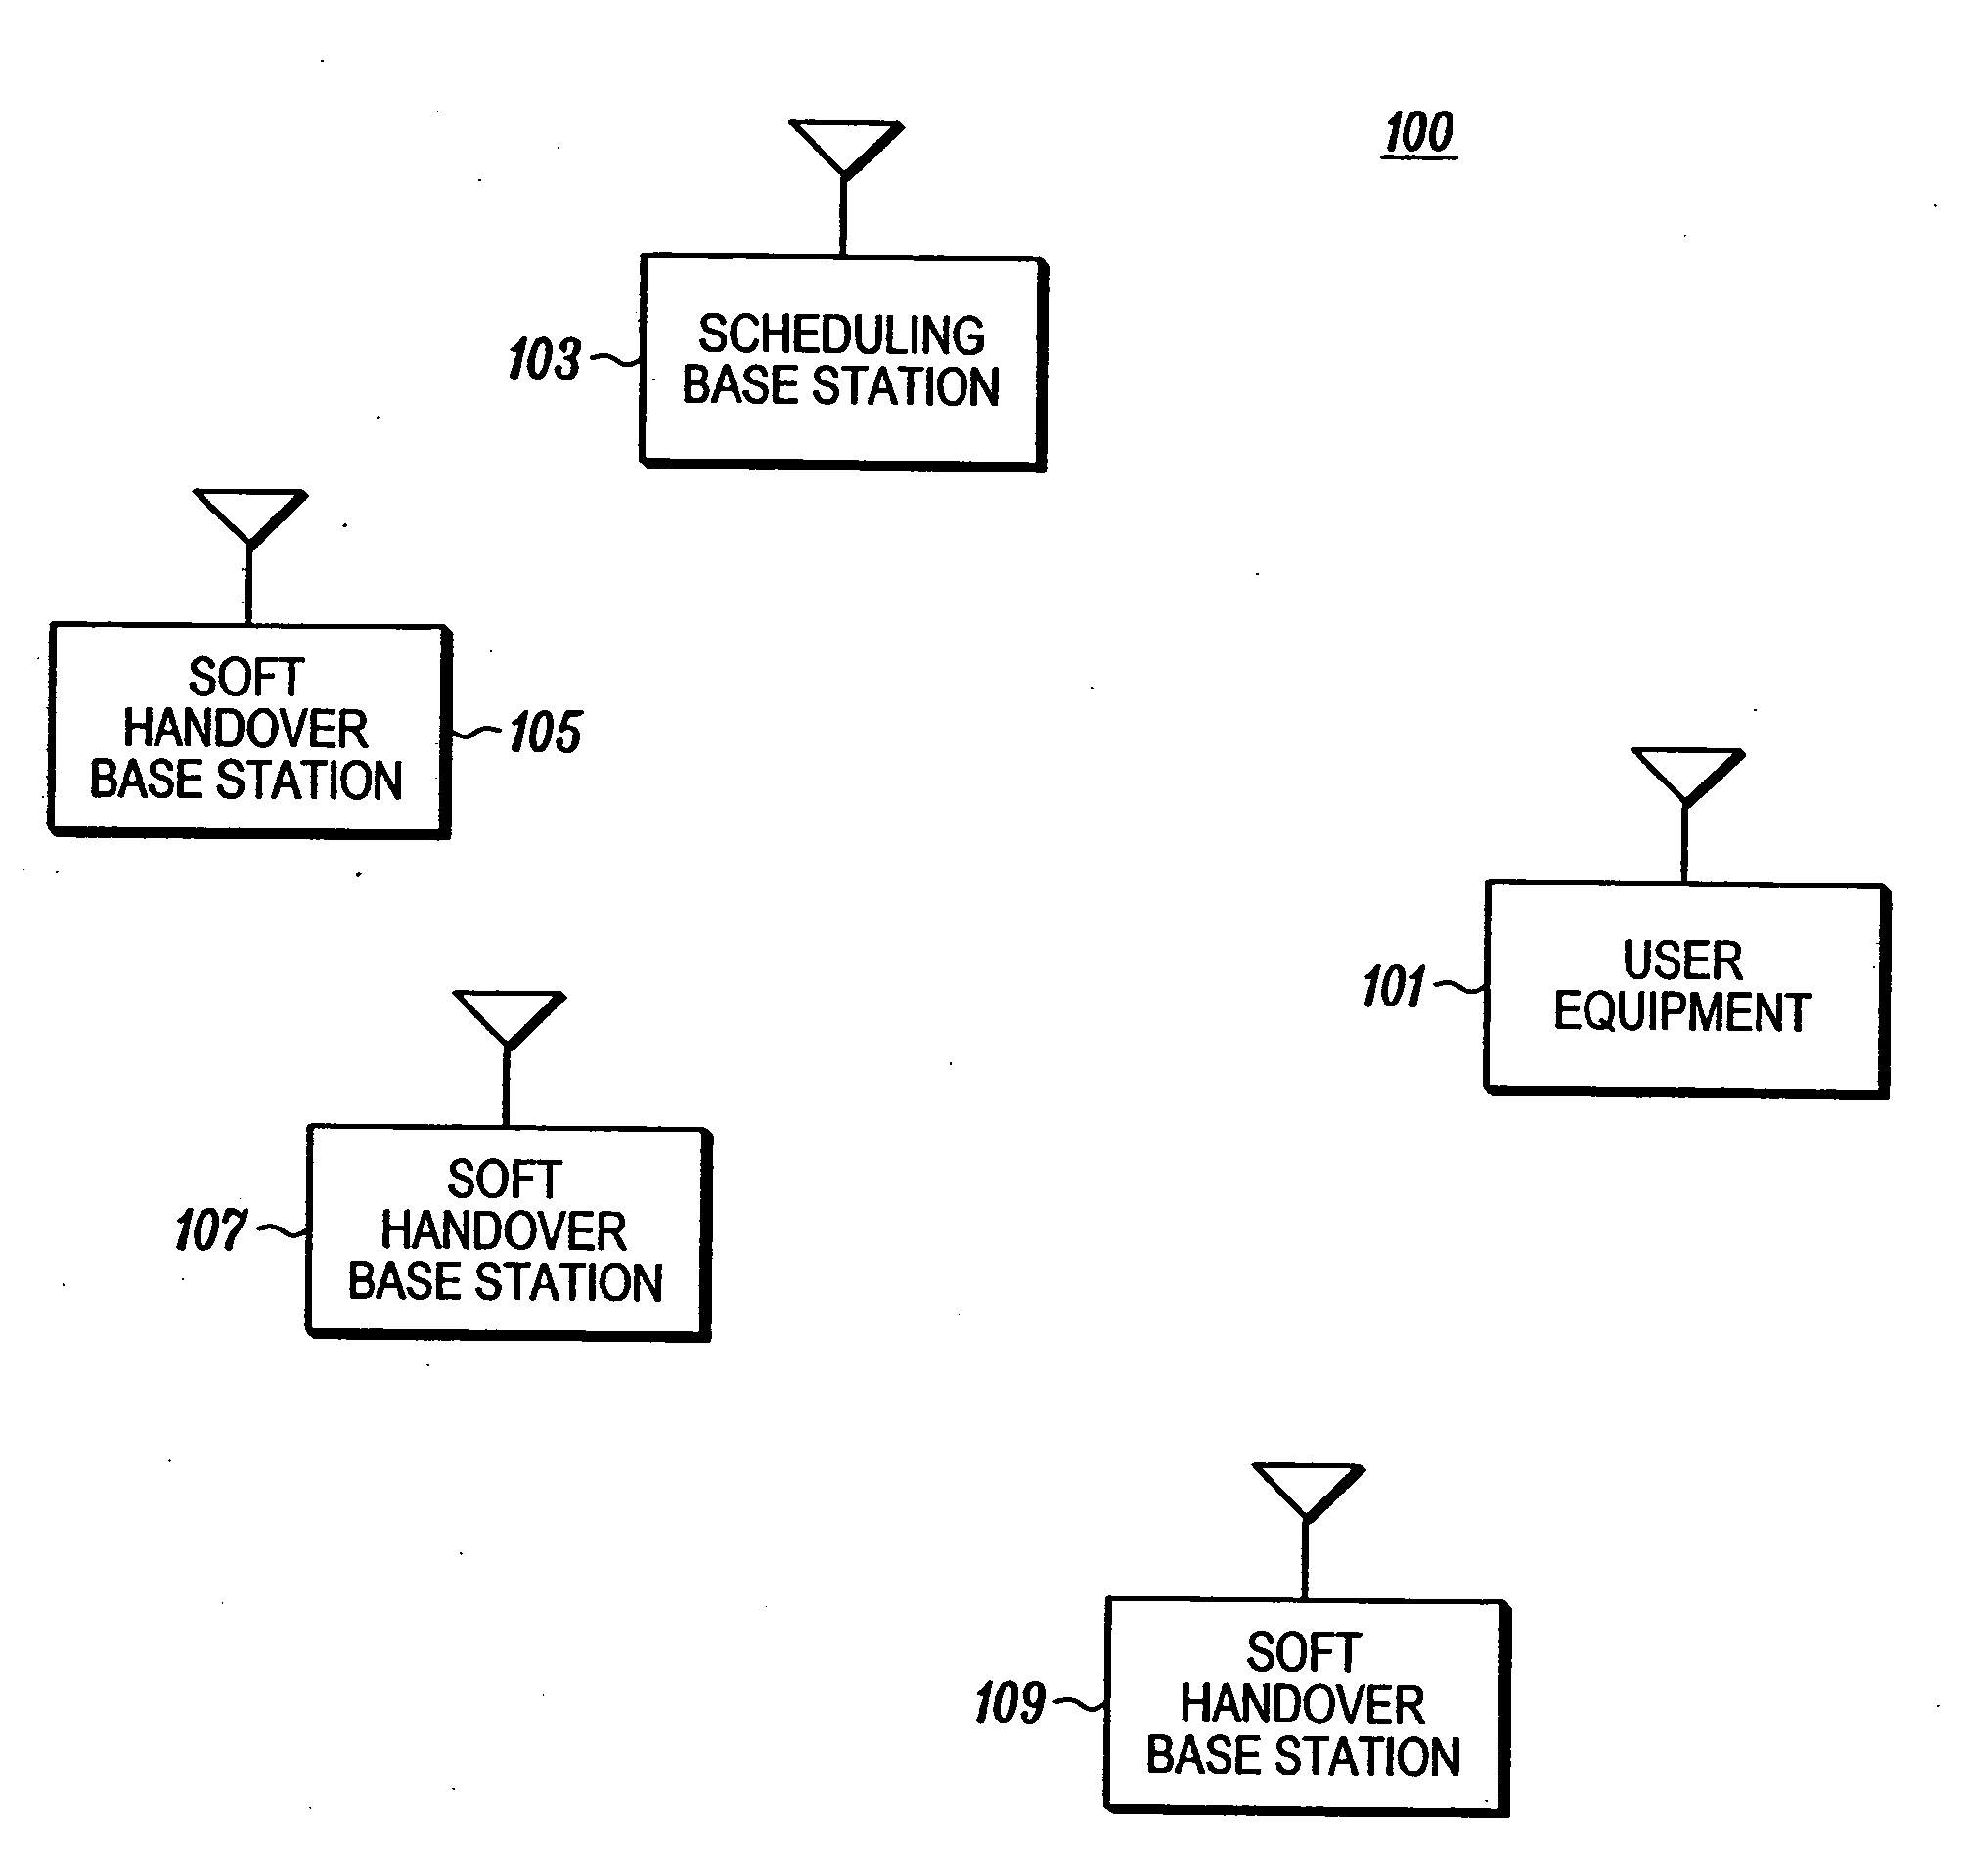 Method and apparatus for uplink communication in a cellular communication system